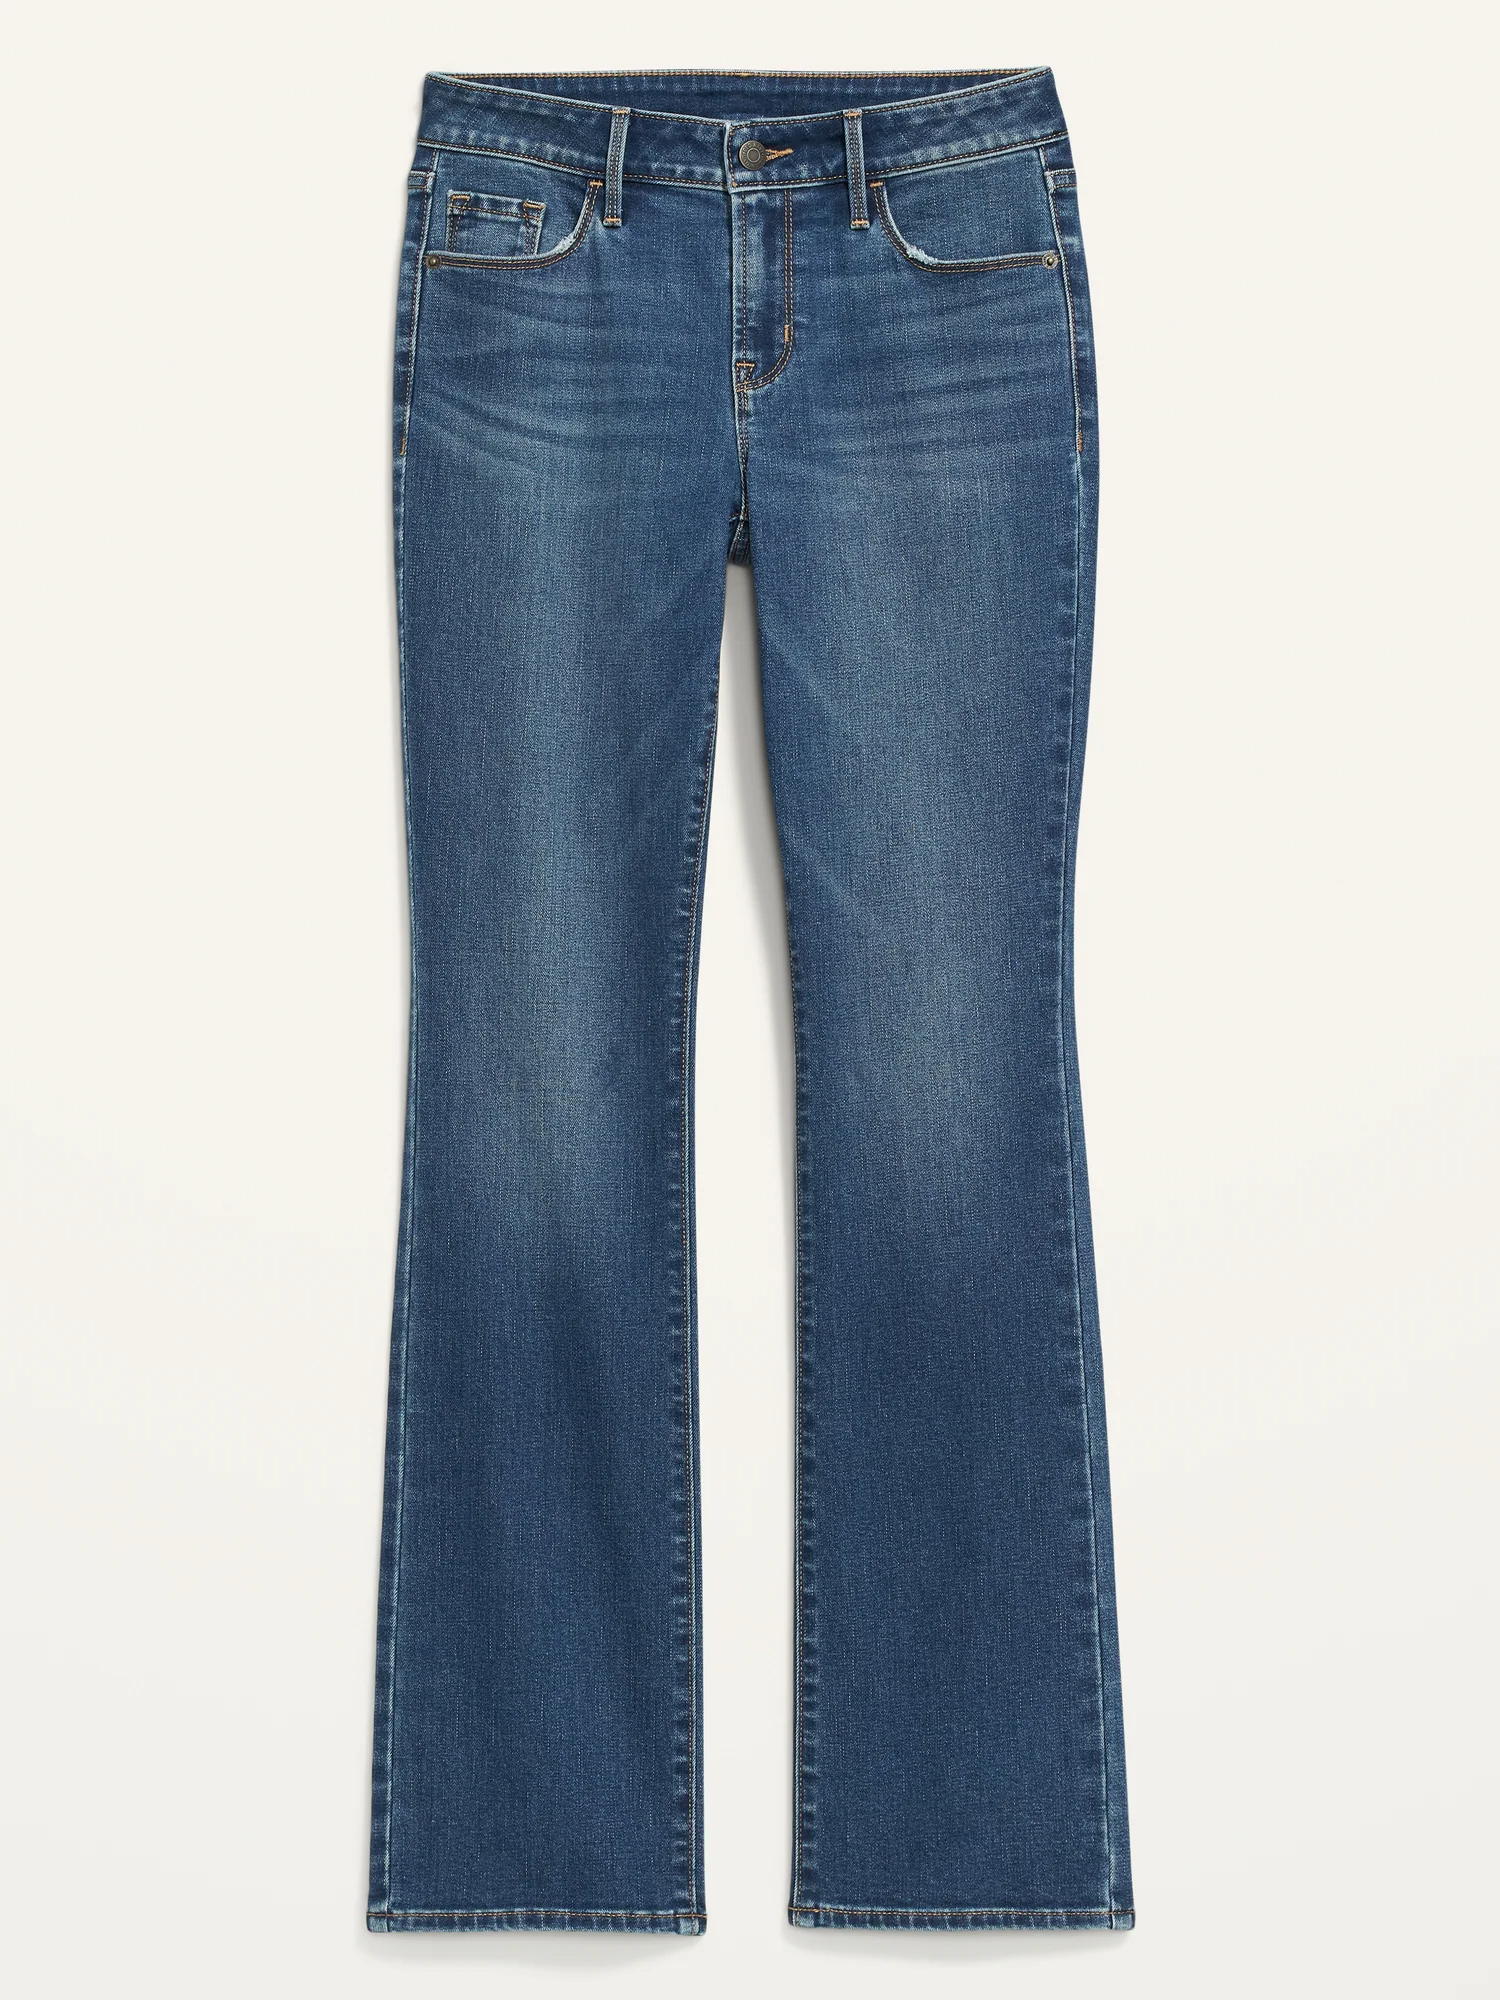 old navy boot cut jeans